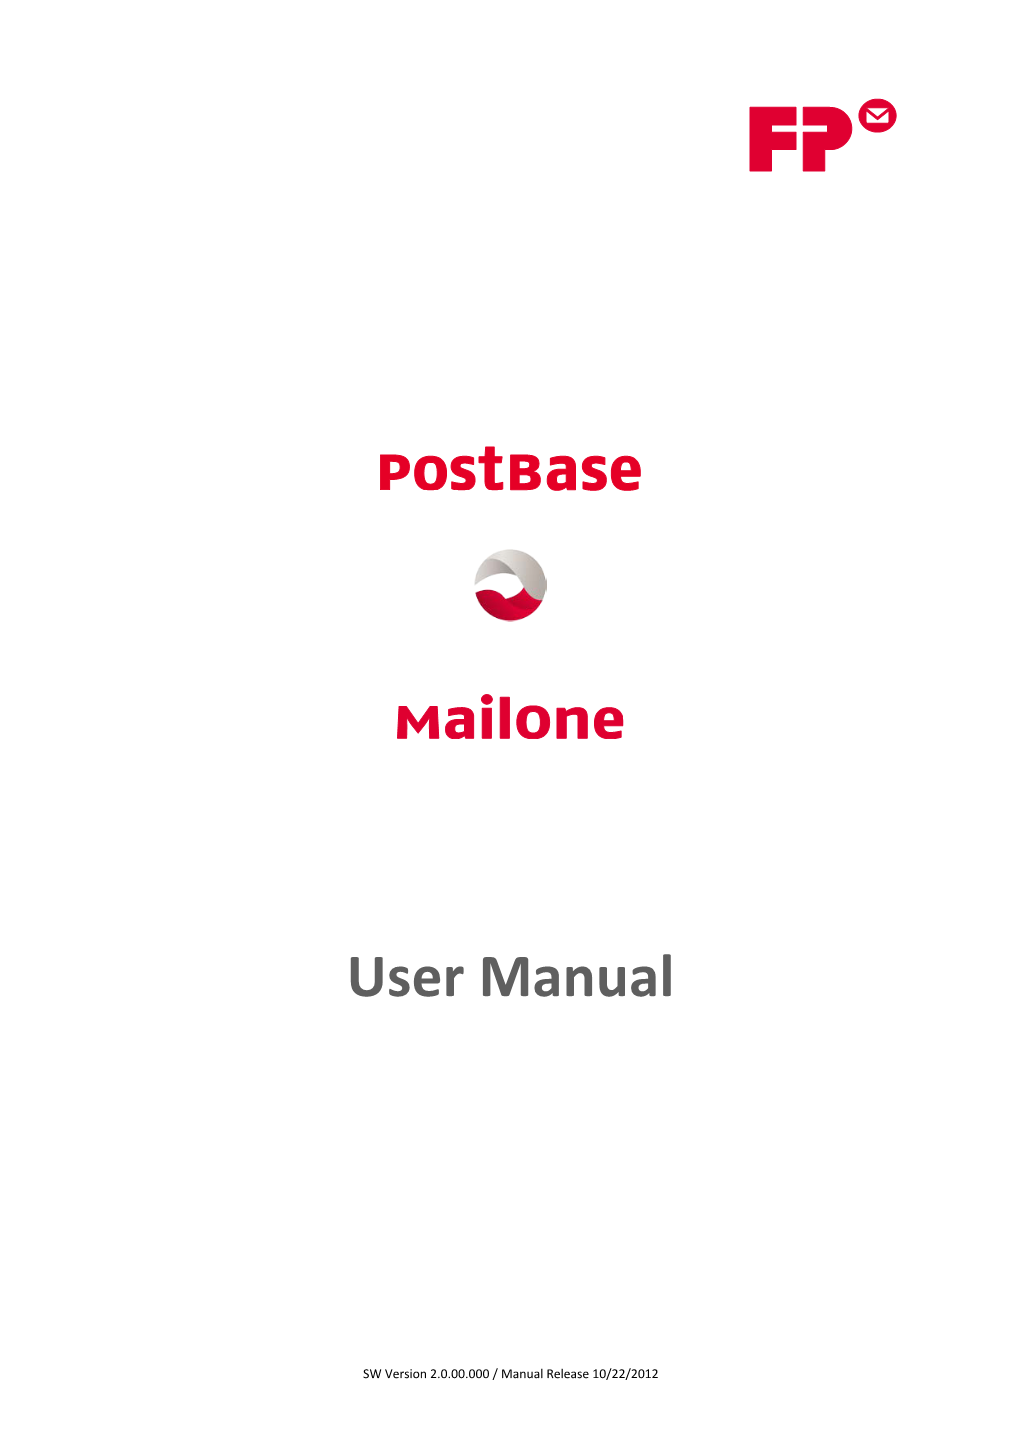 Mailone for Postbase User Manual Contents